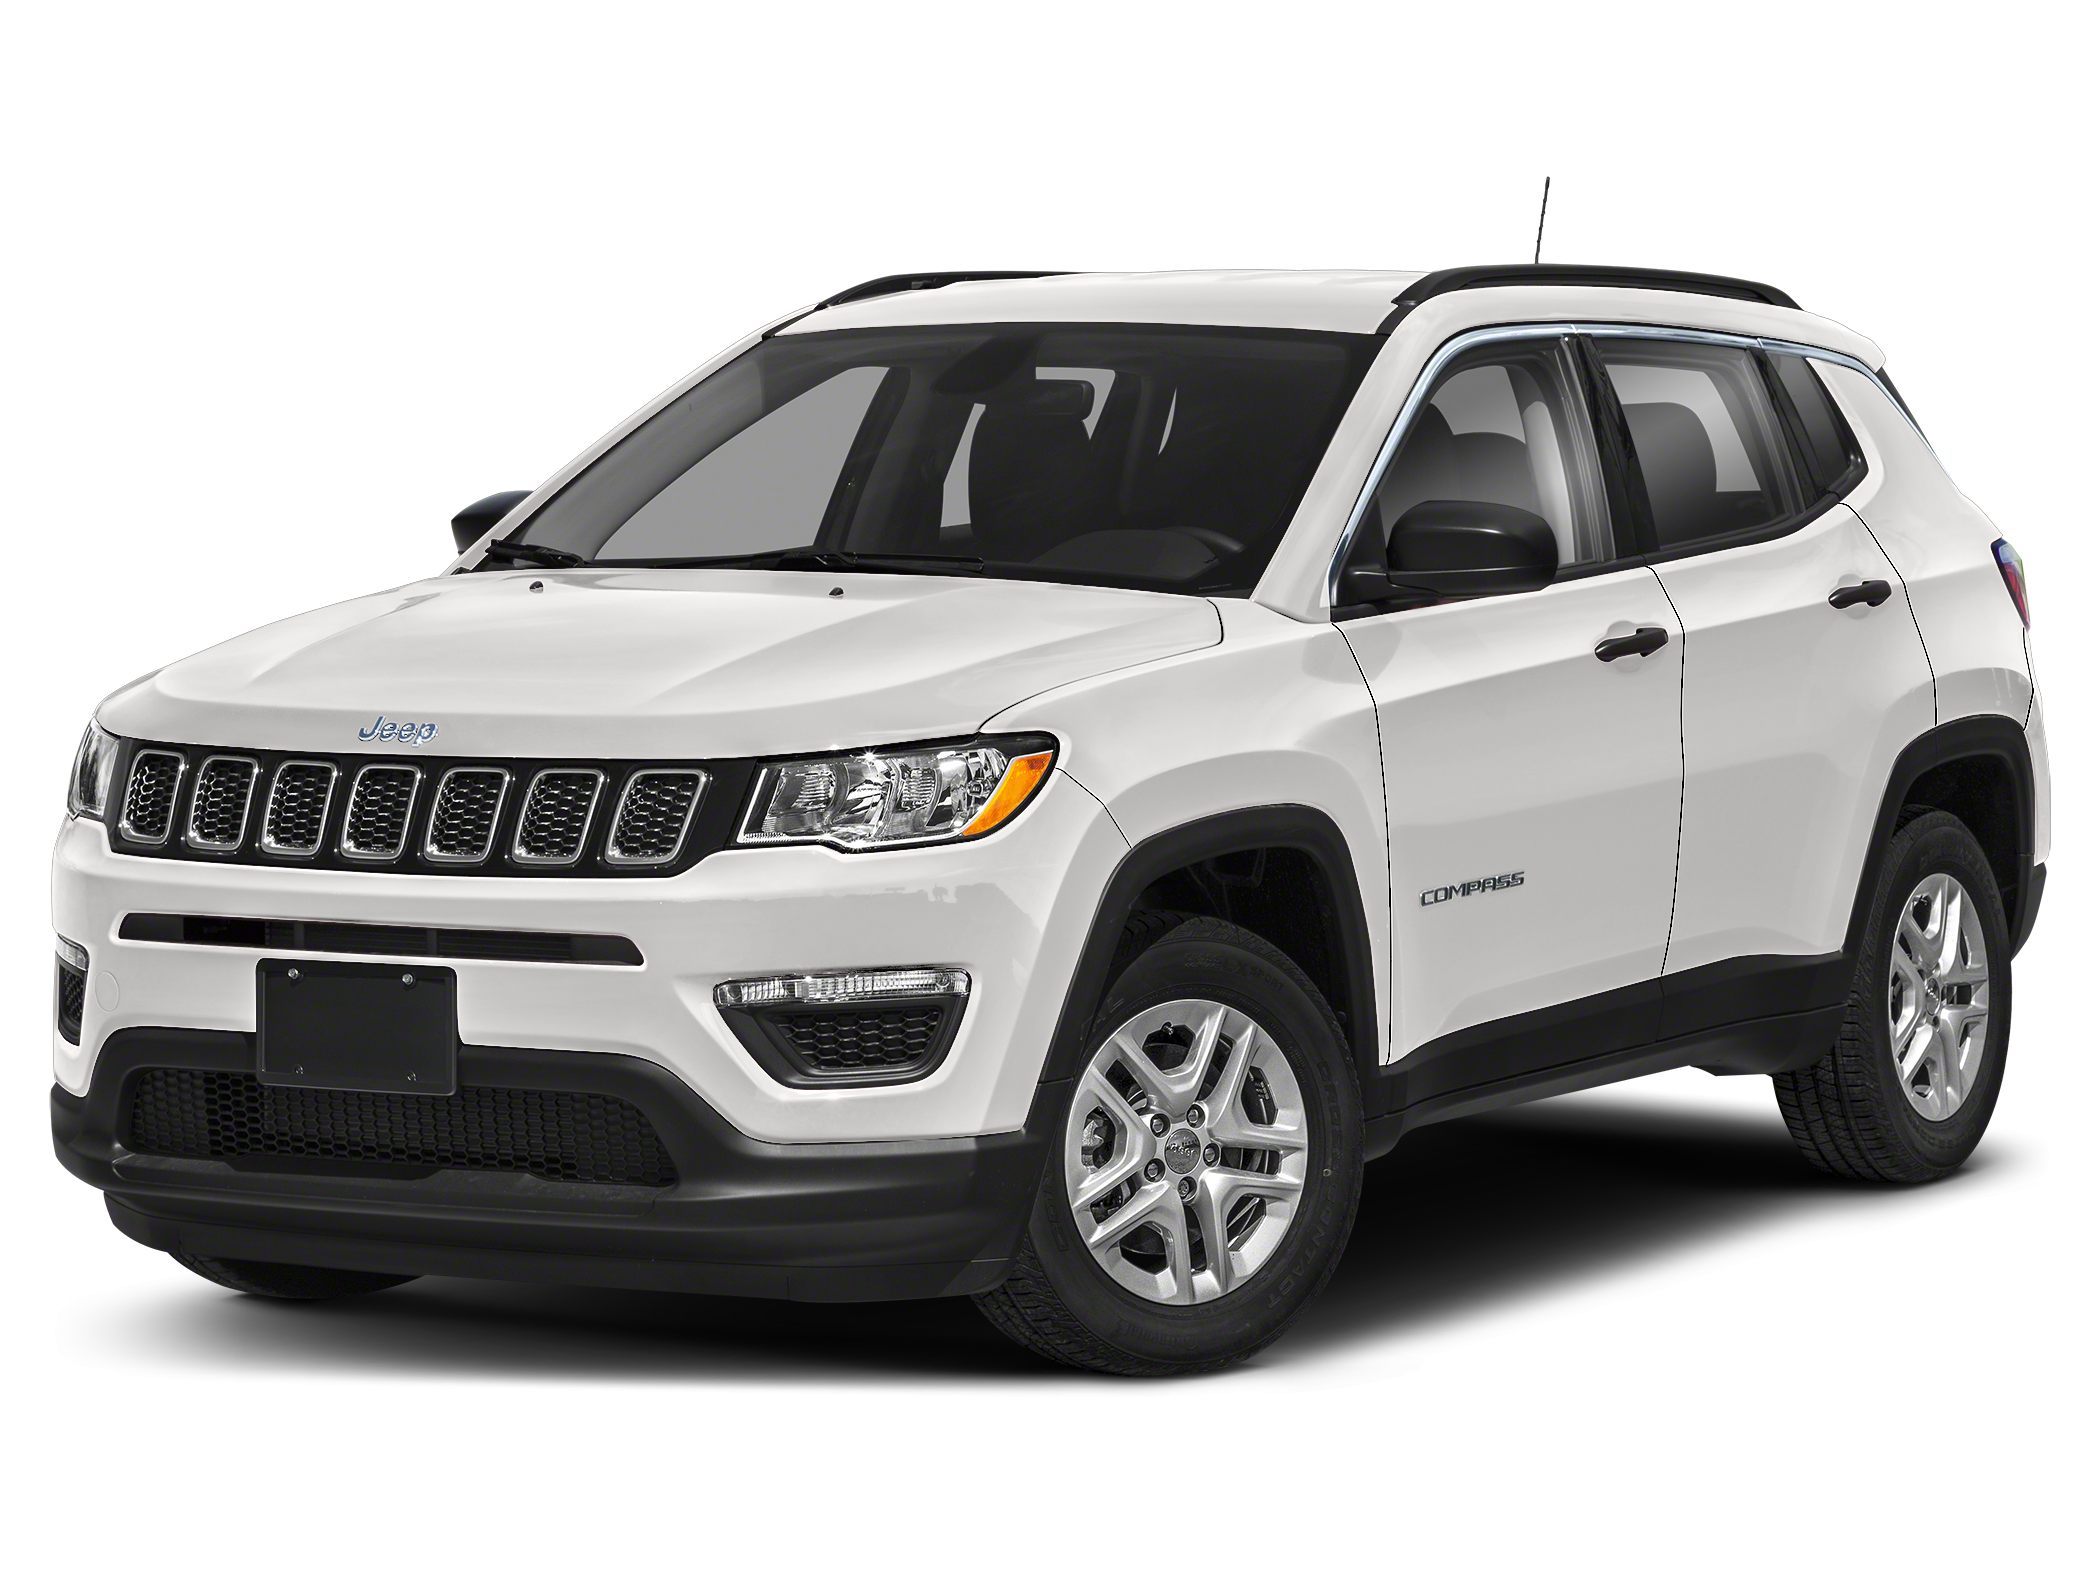 2020 Jeep Compass Limited Hero Image